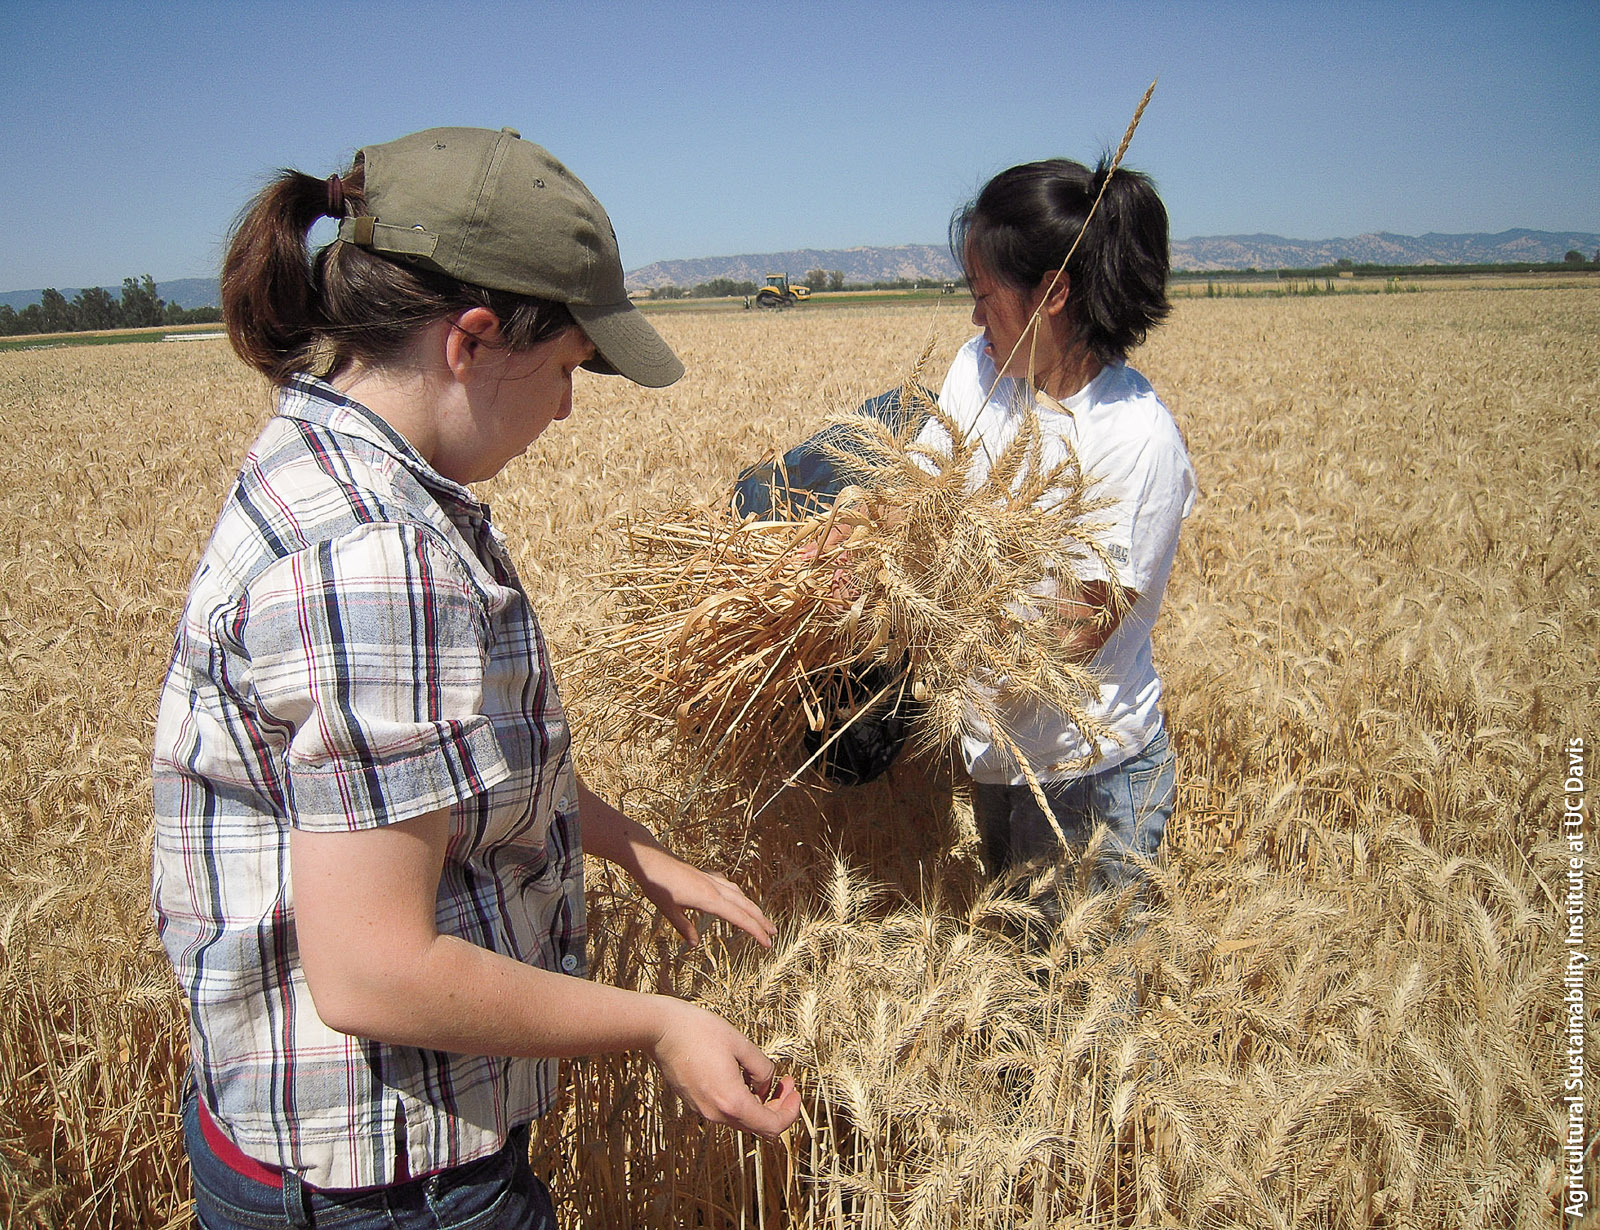 Researchers at RRSAF are evaluating new varieties of climate-smart crops, such as perennial wheat, for their yield and resilience in California's Mediterranean climate. Here, students hand harvest wheat for data collection.